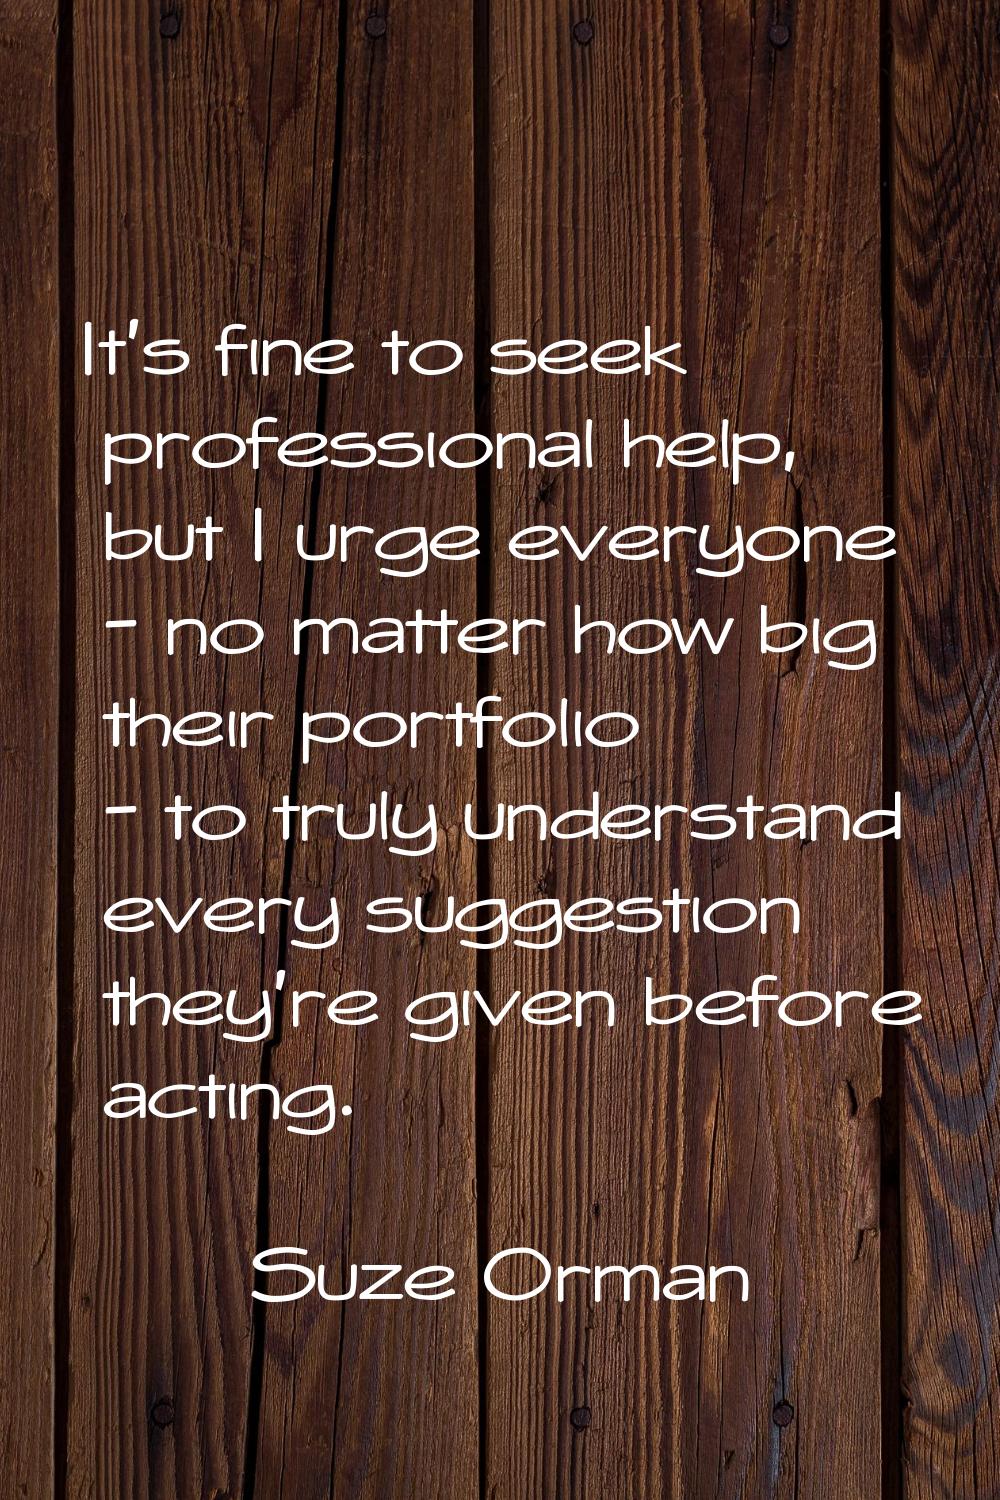 It's fine to seek professional help, but I urge everyone - no matter how big their portfolio - to t